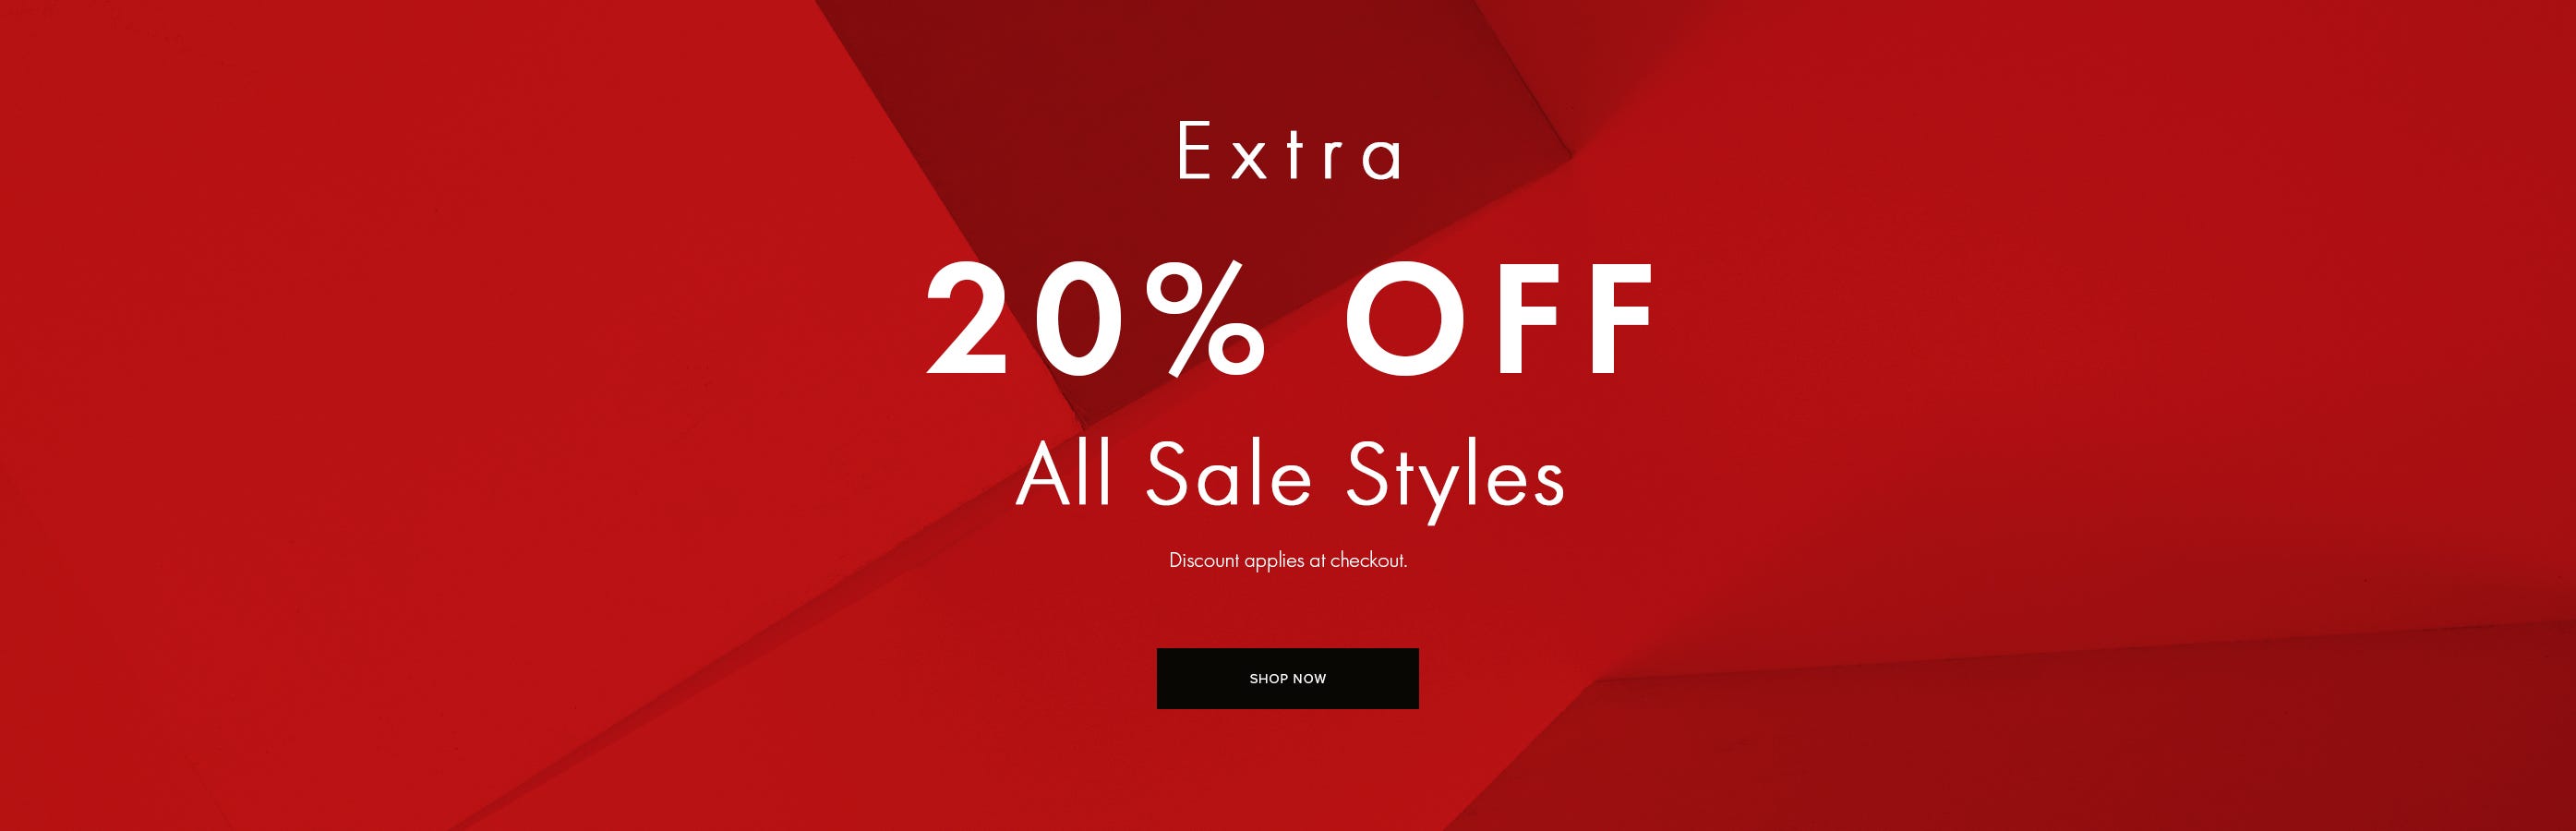 Extra 20% OFF on all sale styles